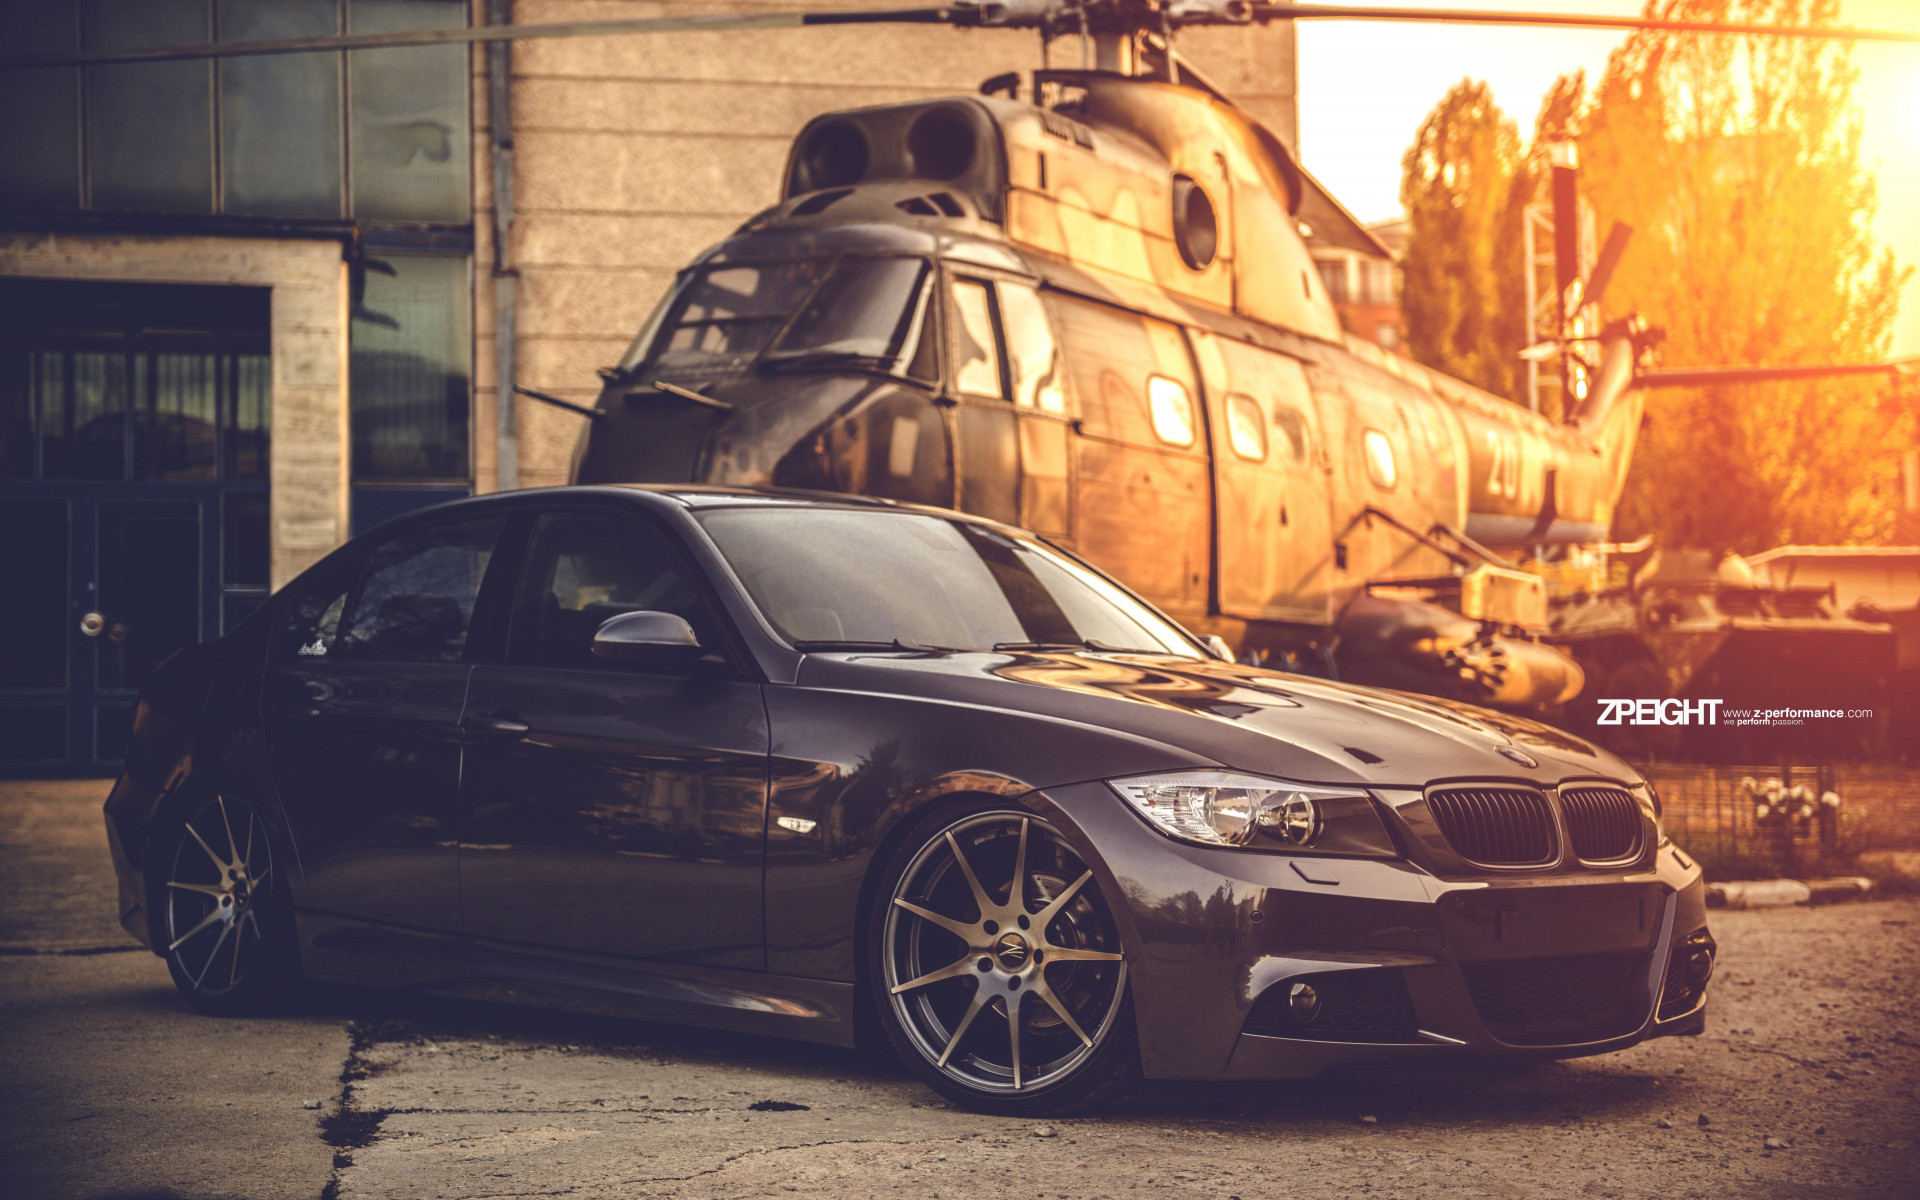 BMW E90 and one helicopter wallpaper 1920x1200